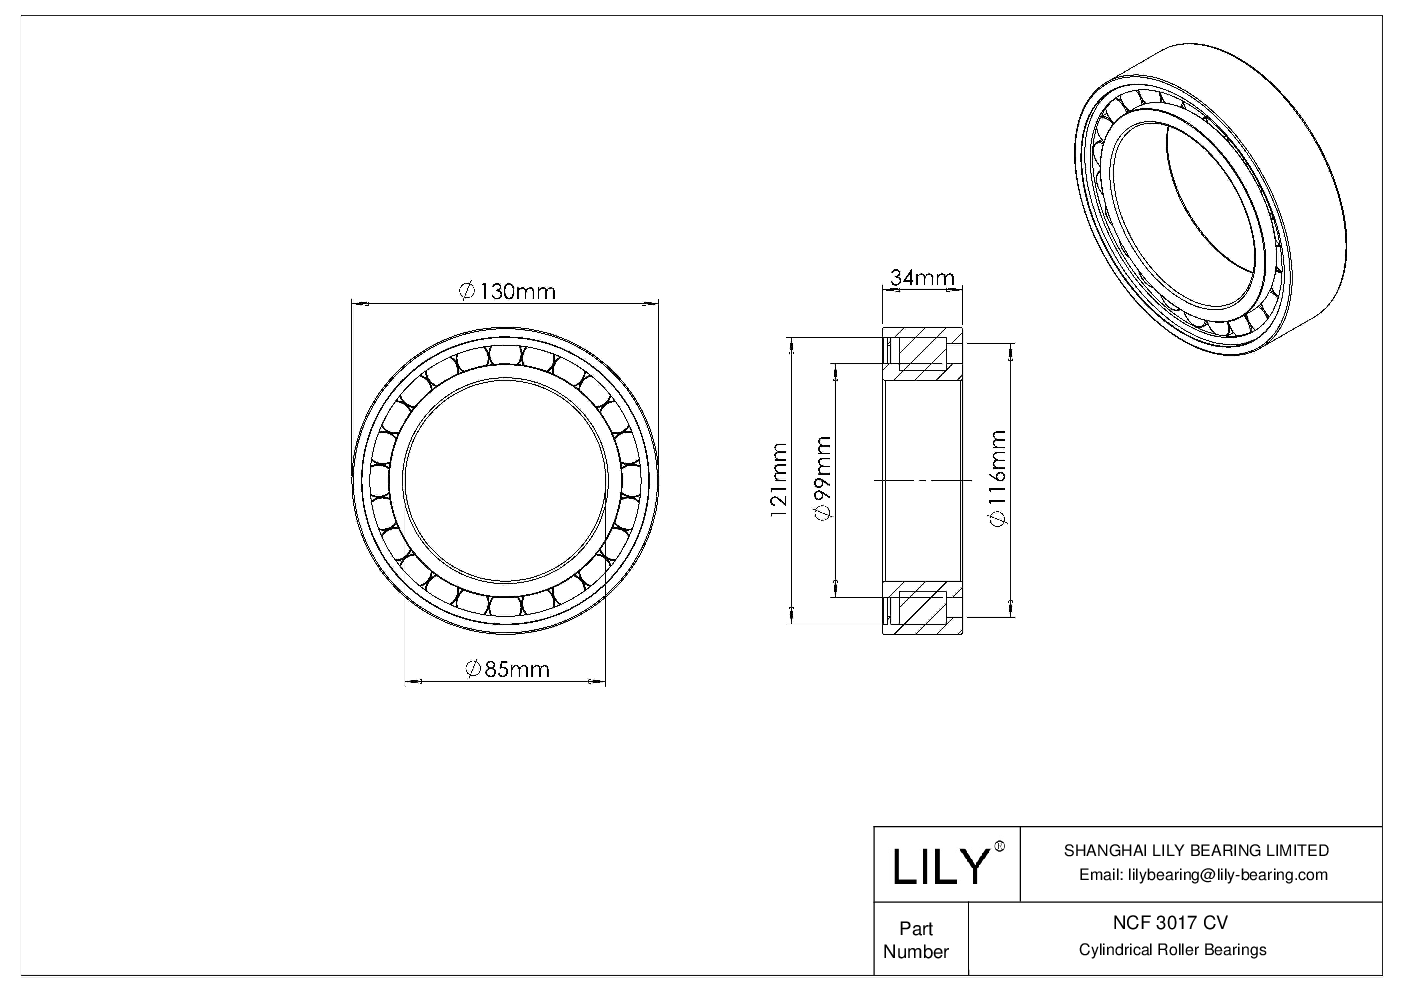 NCF 3017 CV Single Row Full Complement Cylindrical Roller Bearings cad drawing